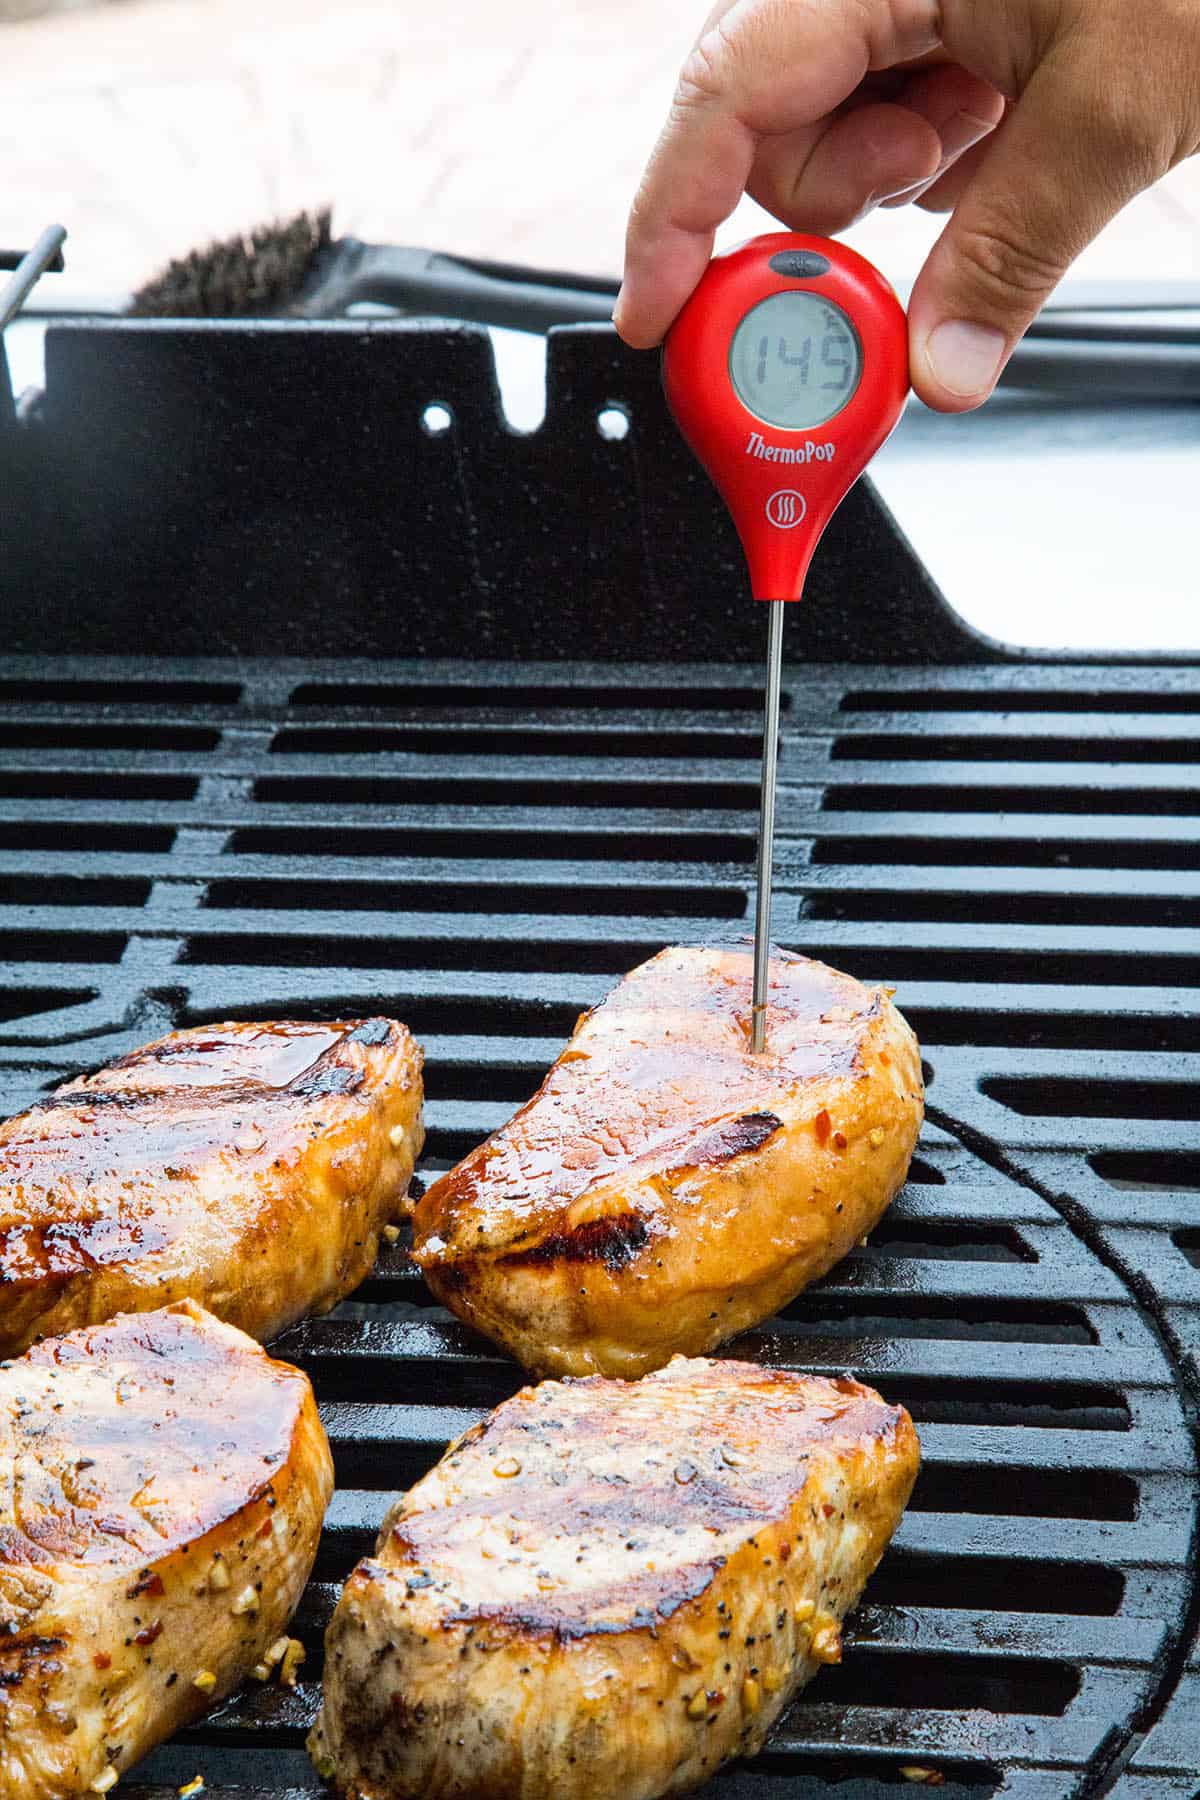 Measuring the internal temperature of our grilled pork chops